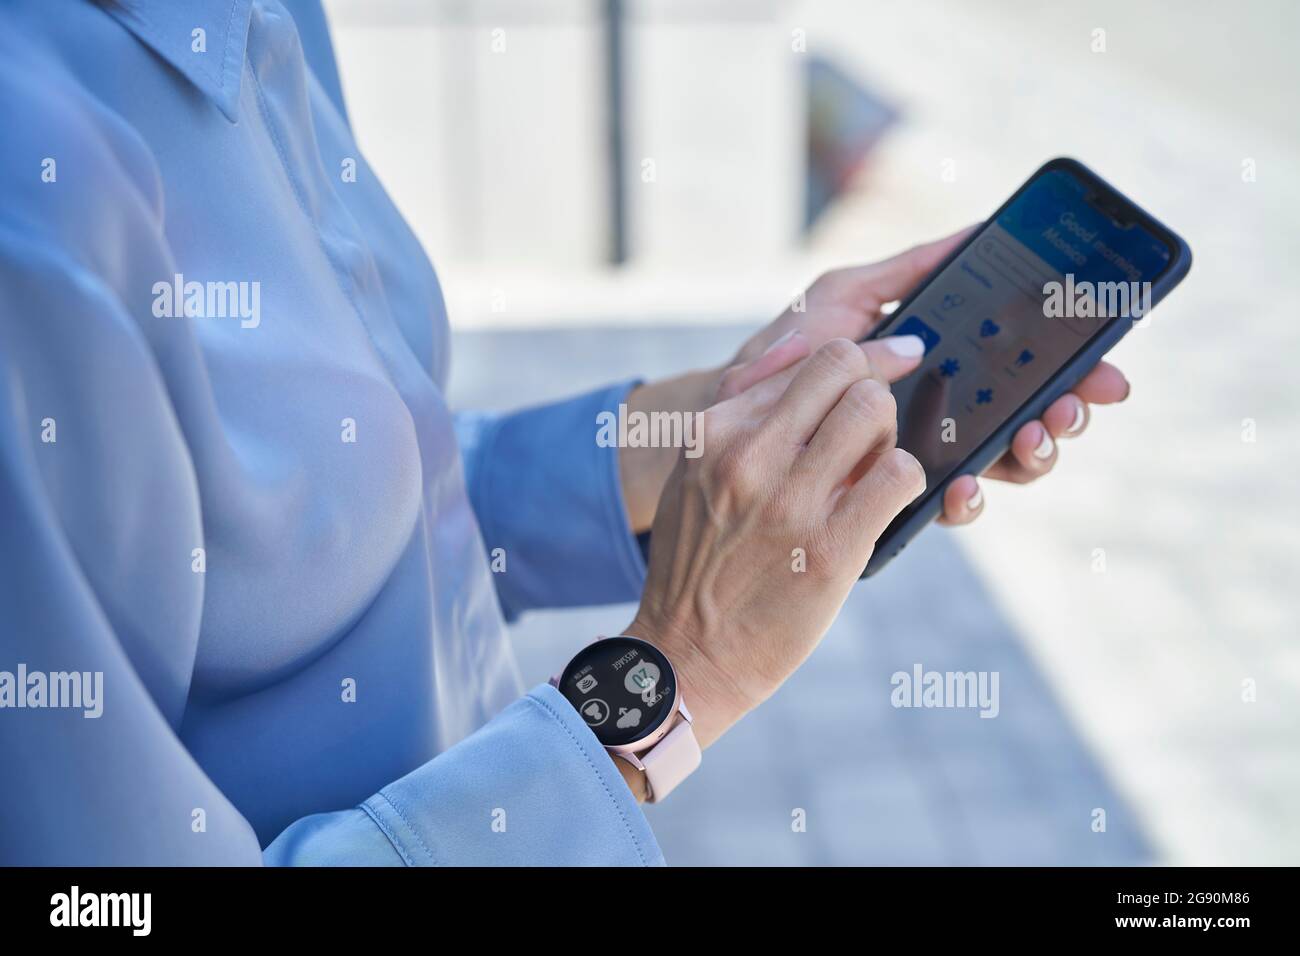 Businesswoman with smart wristwatch using mobile phone Stock Photo